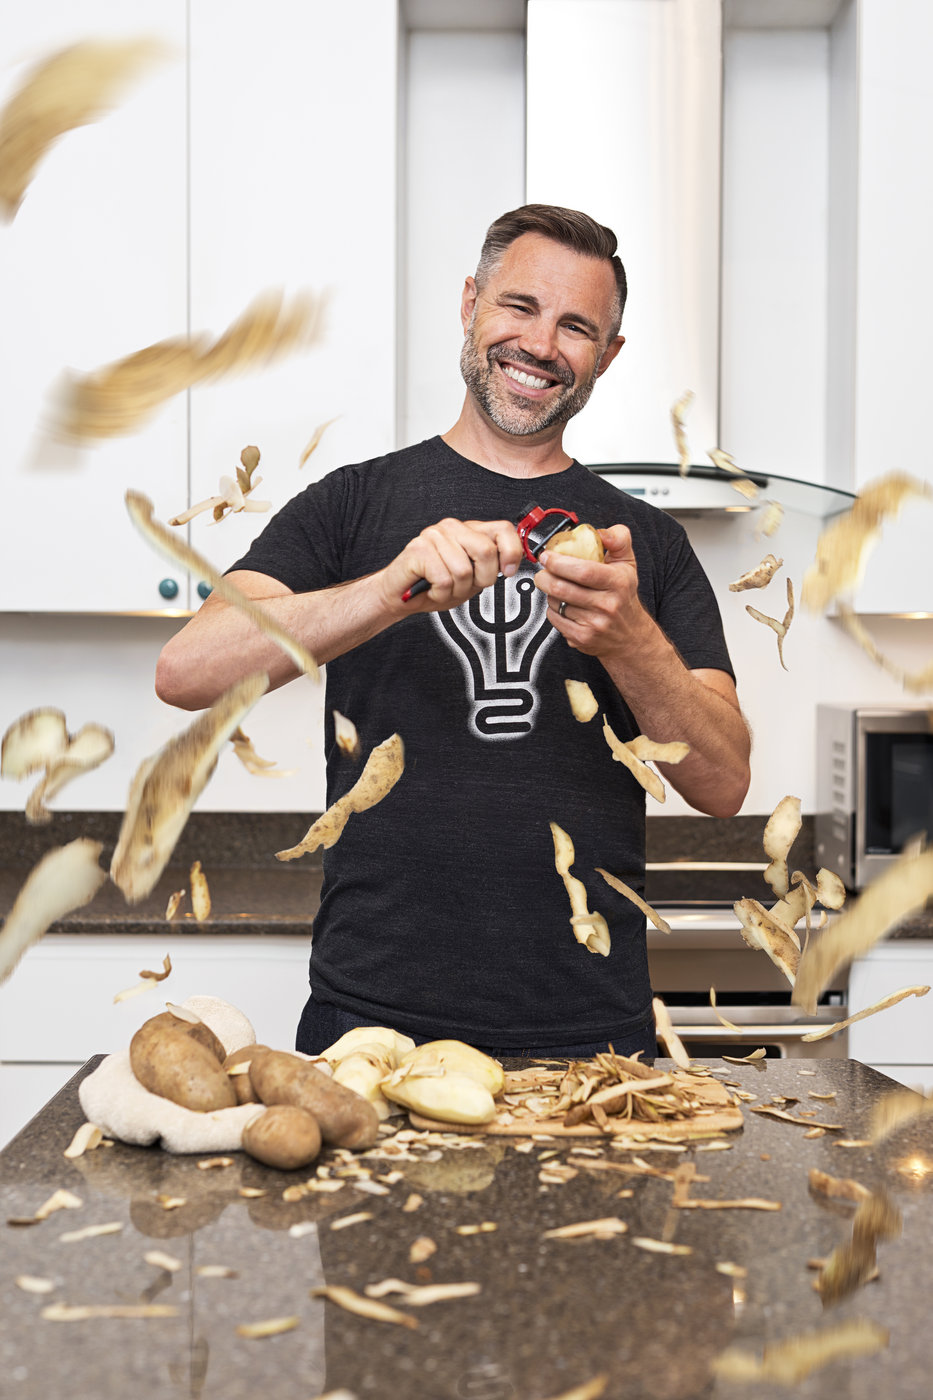 Chris Hawker, owner of Trident Invents, demonstrates how to peel potatoes with his perfect potato peeler invention